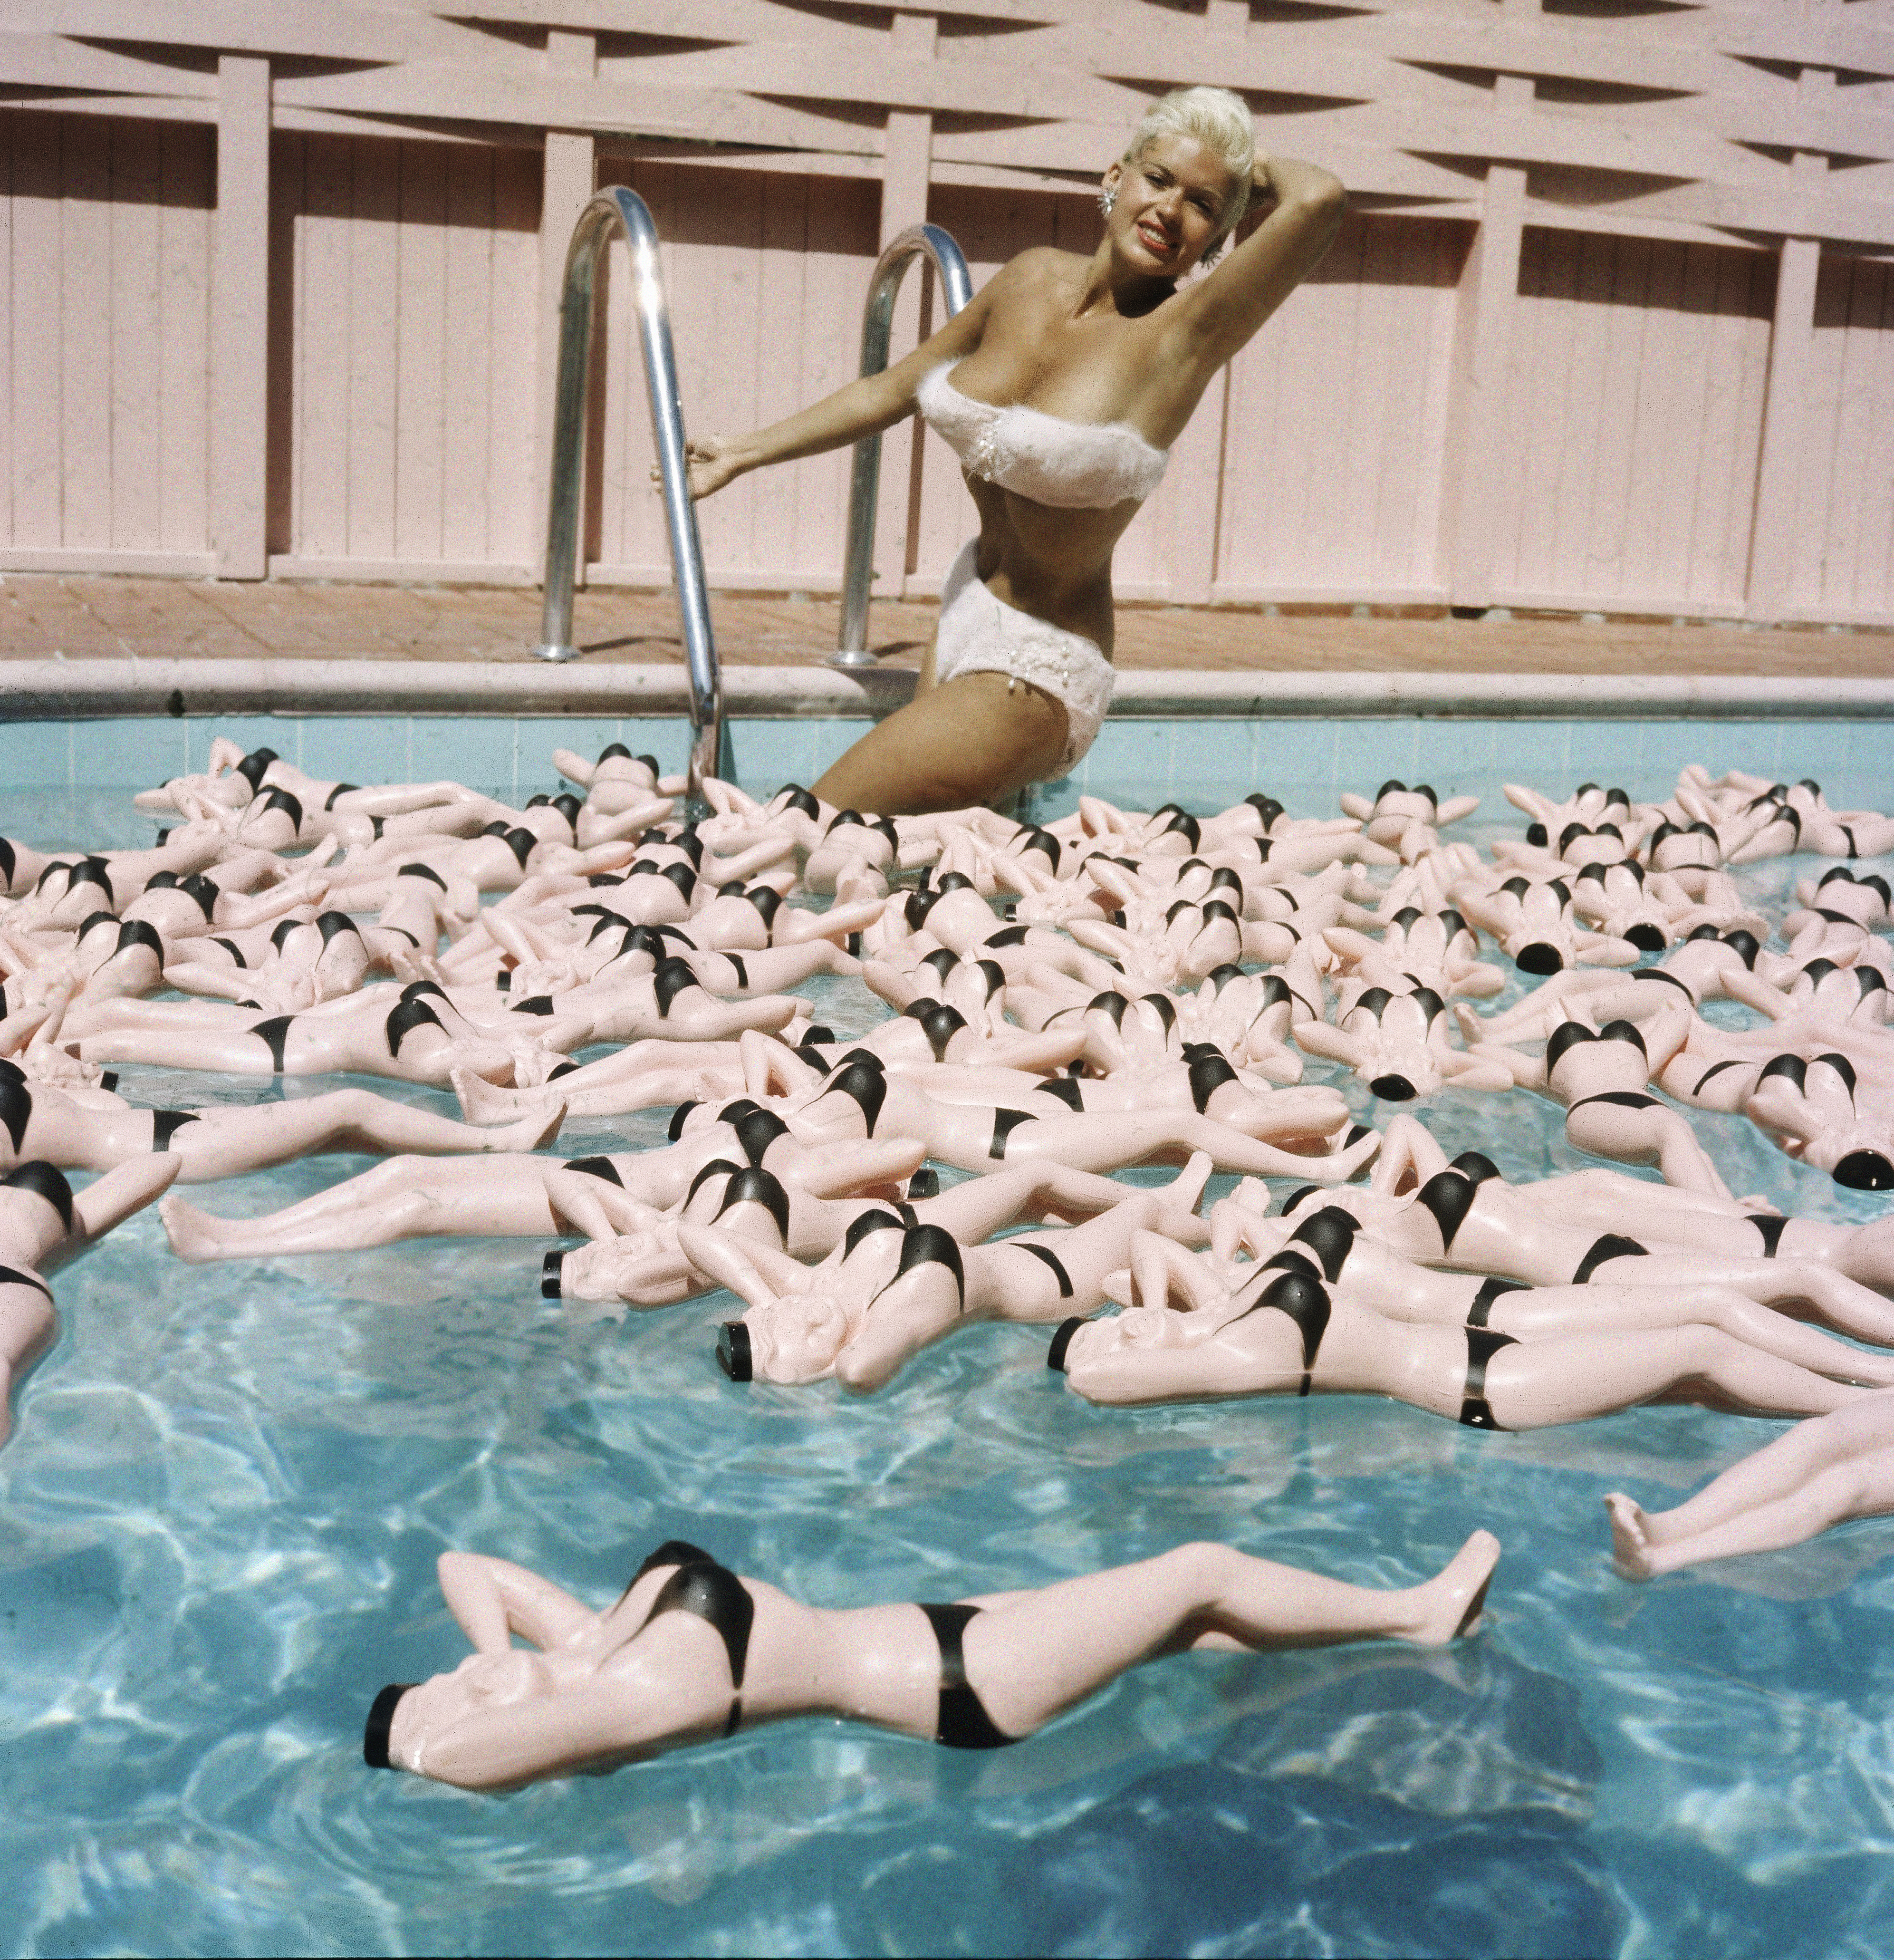 Jayne Mansfield, with a tan and platinum blond hair, poses in a white bikini at the edge of a swimming pool filled with bottles shaped like bikini-clad versions of herself.